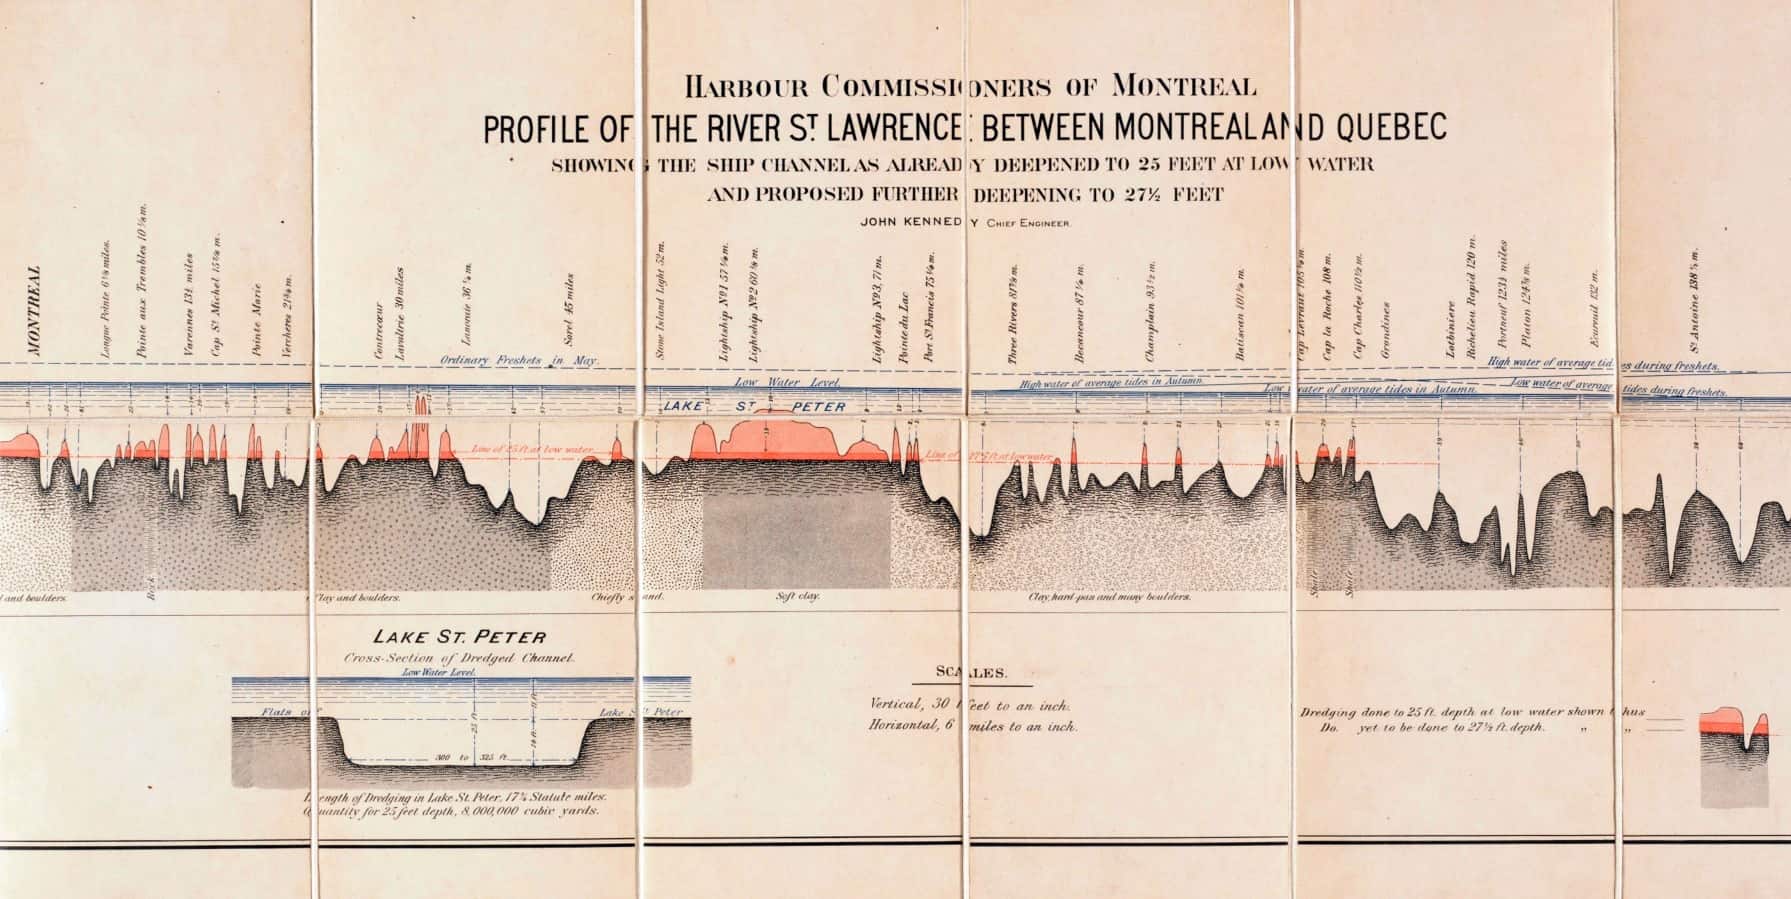 Profile of the River St. Lawrence between Montreal and Quebec, 1883.